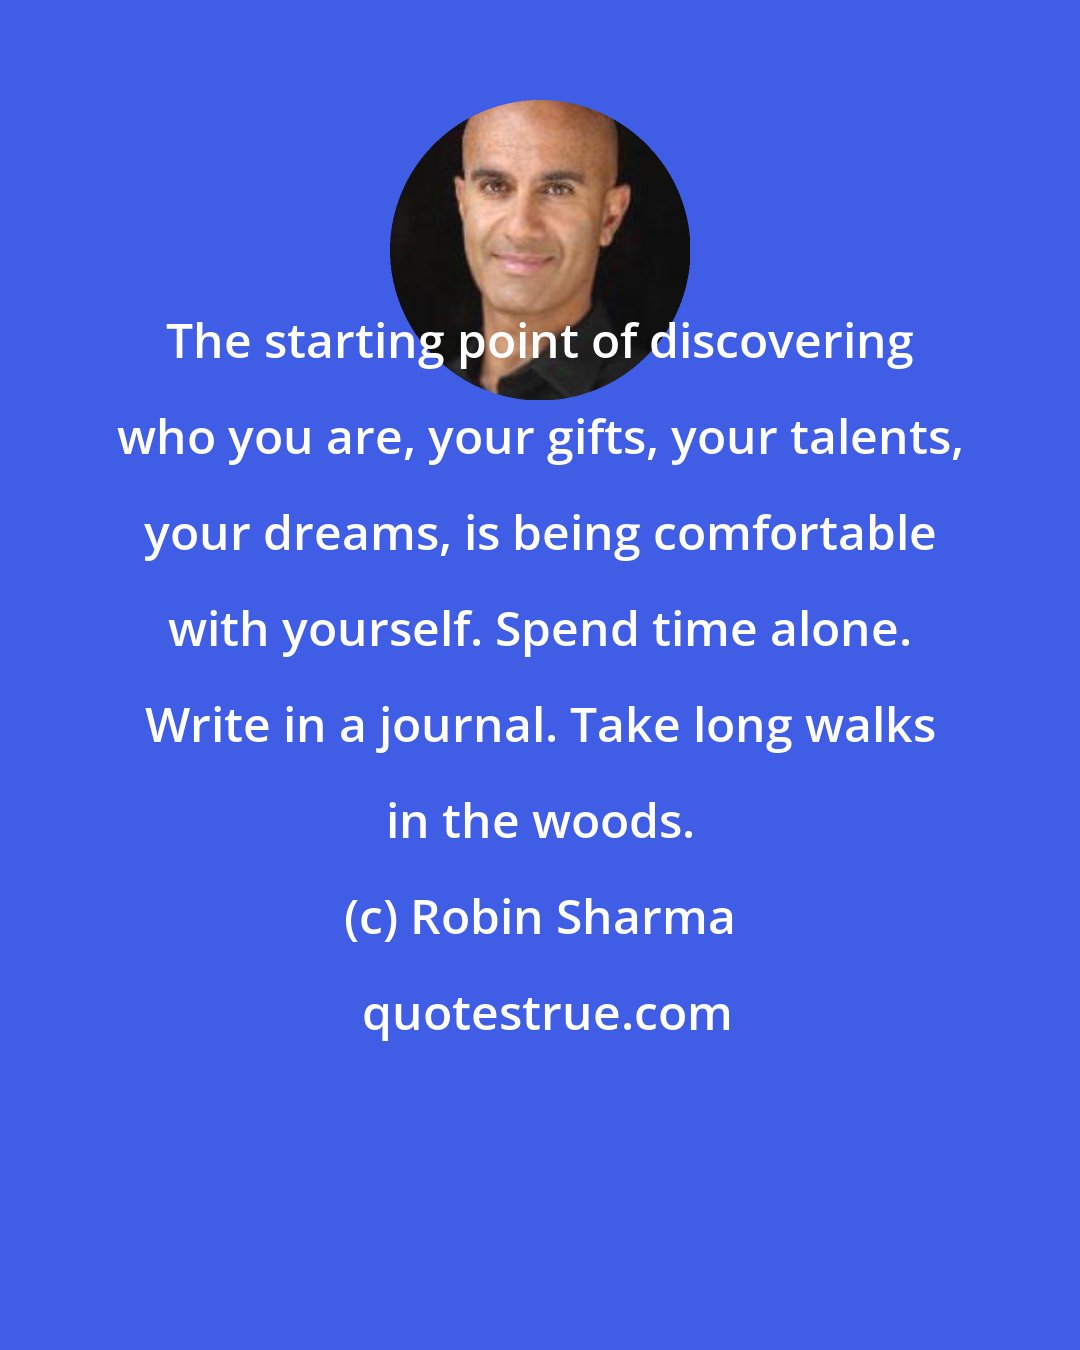 Robin Sharma: The starting point of discovering who you are, your gifts, your talents, your dreams, is being comfortable with yourself. Spend time alone. Write in a journal. Take long walks in the woods.